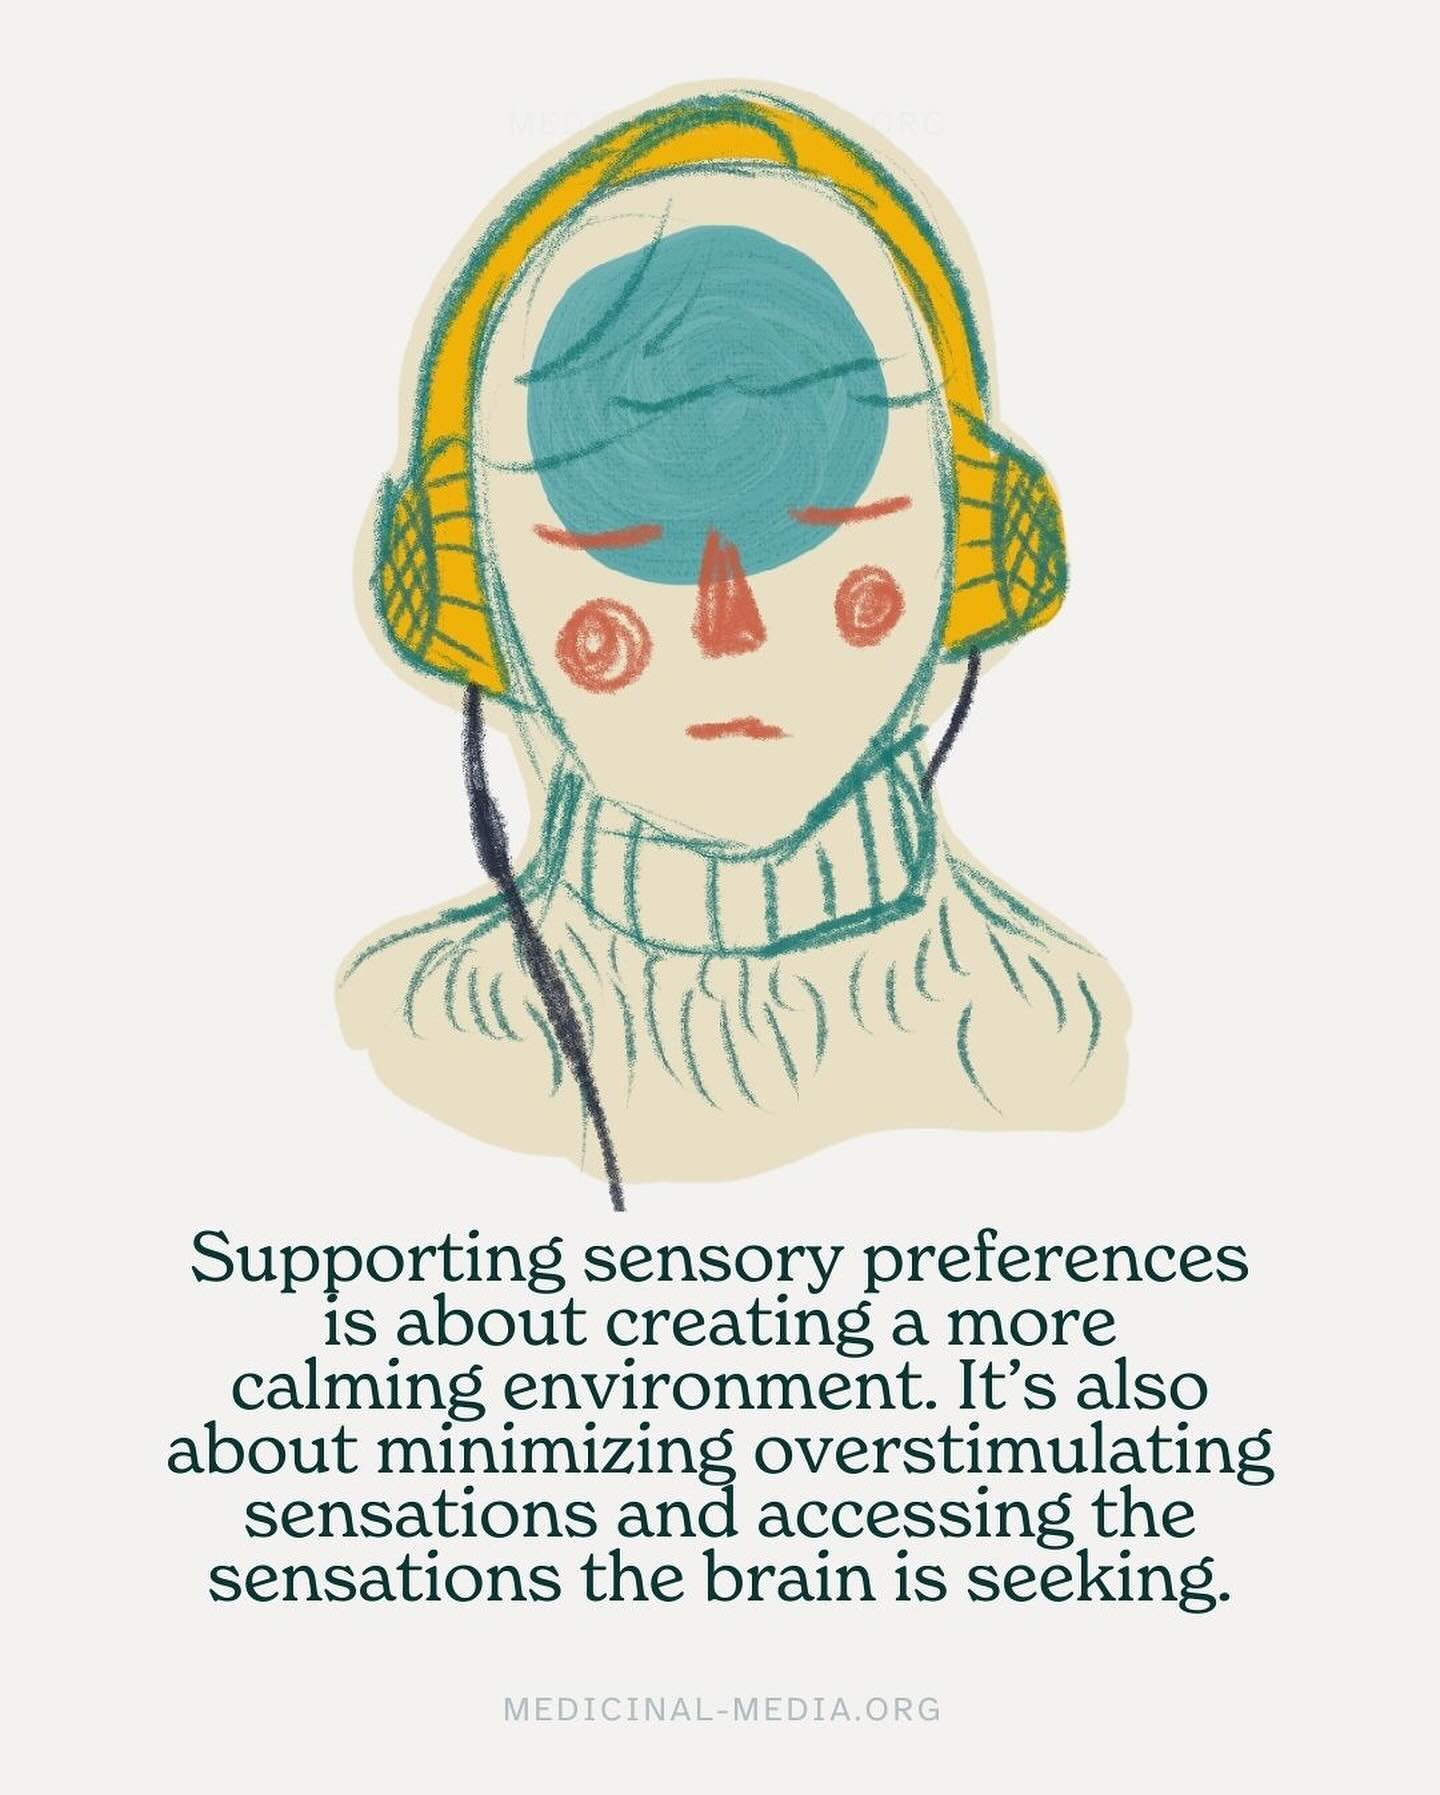 The world can be too big, too bright, and too loud sometimes. Navigating a world that&rsquo;s often at odds with our sensory needs can be a challenge sometimes. Here&rsquo;s a curated selection of apps designed to soothe the overwhelmed and invigorat